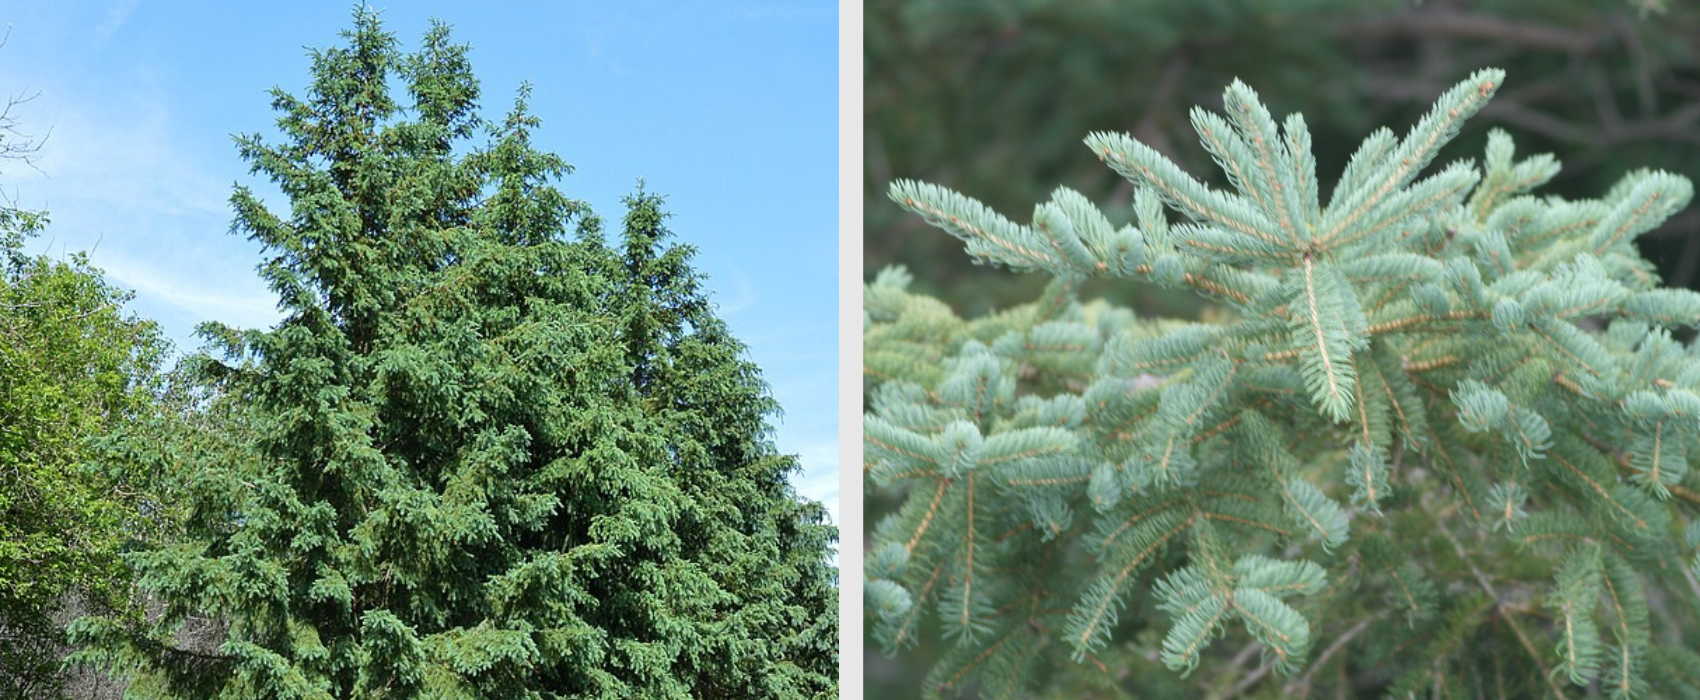 White spruce trees